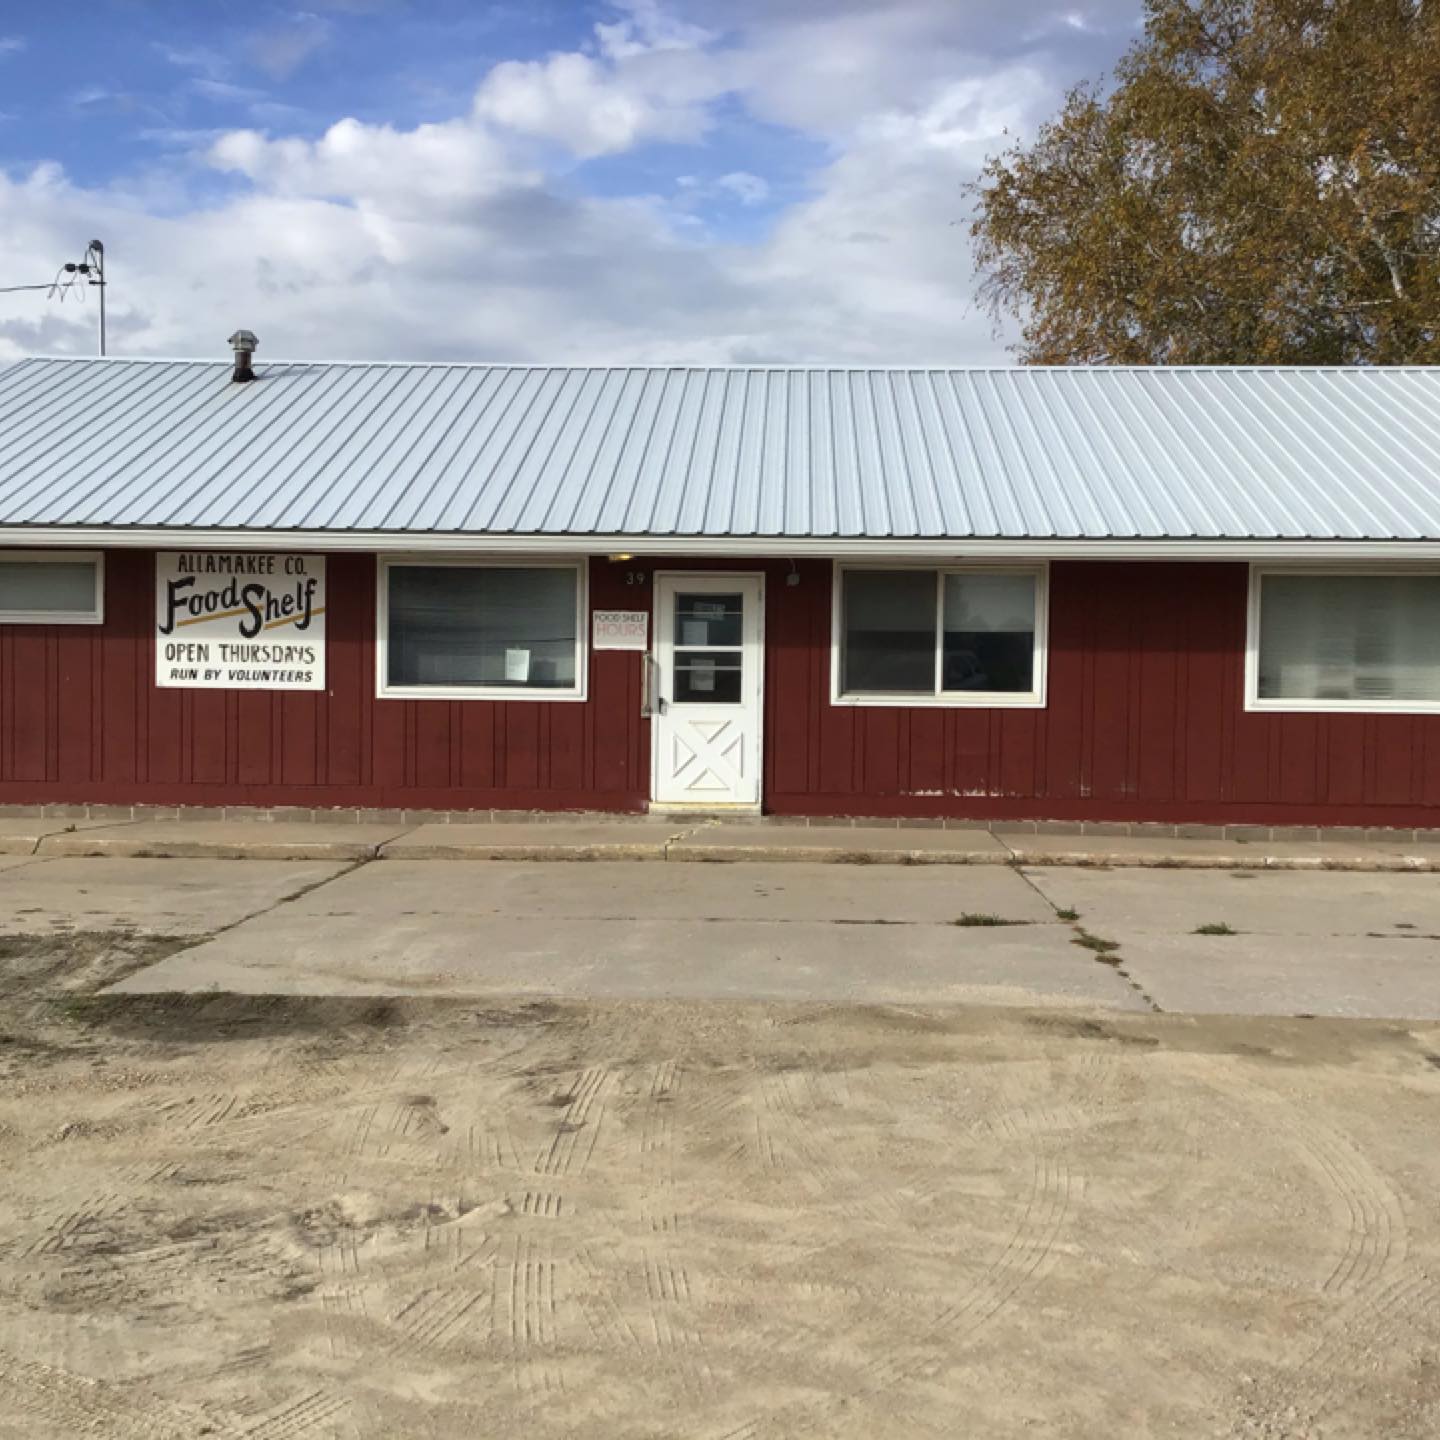 Allamakee County Food Pantry